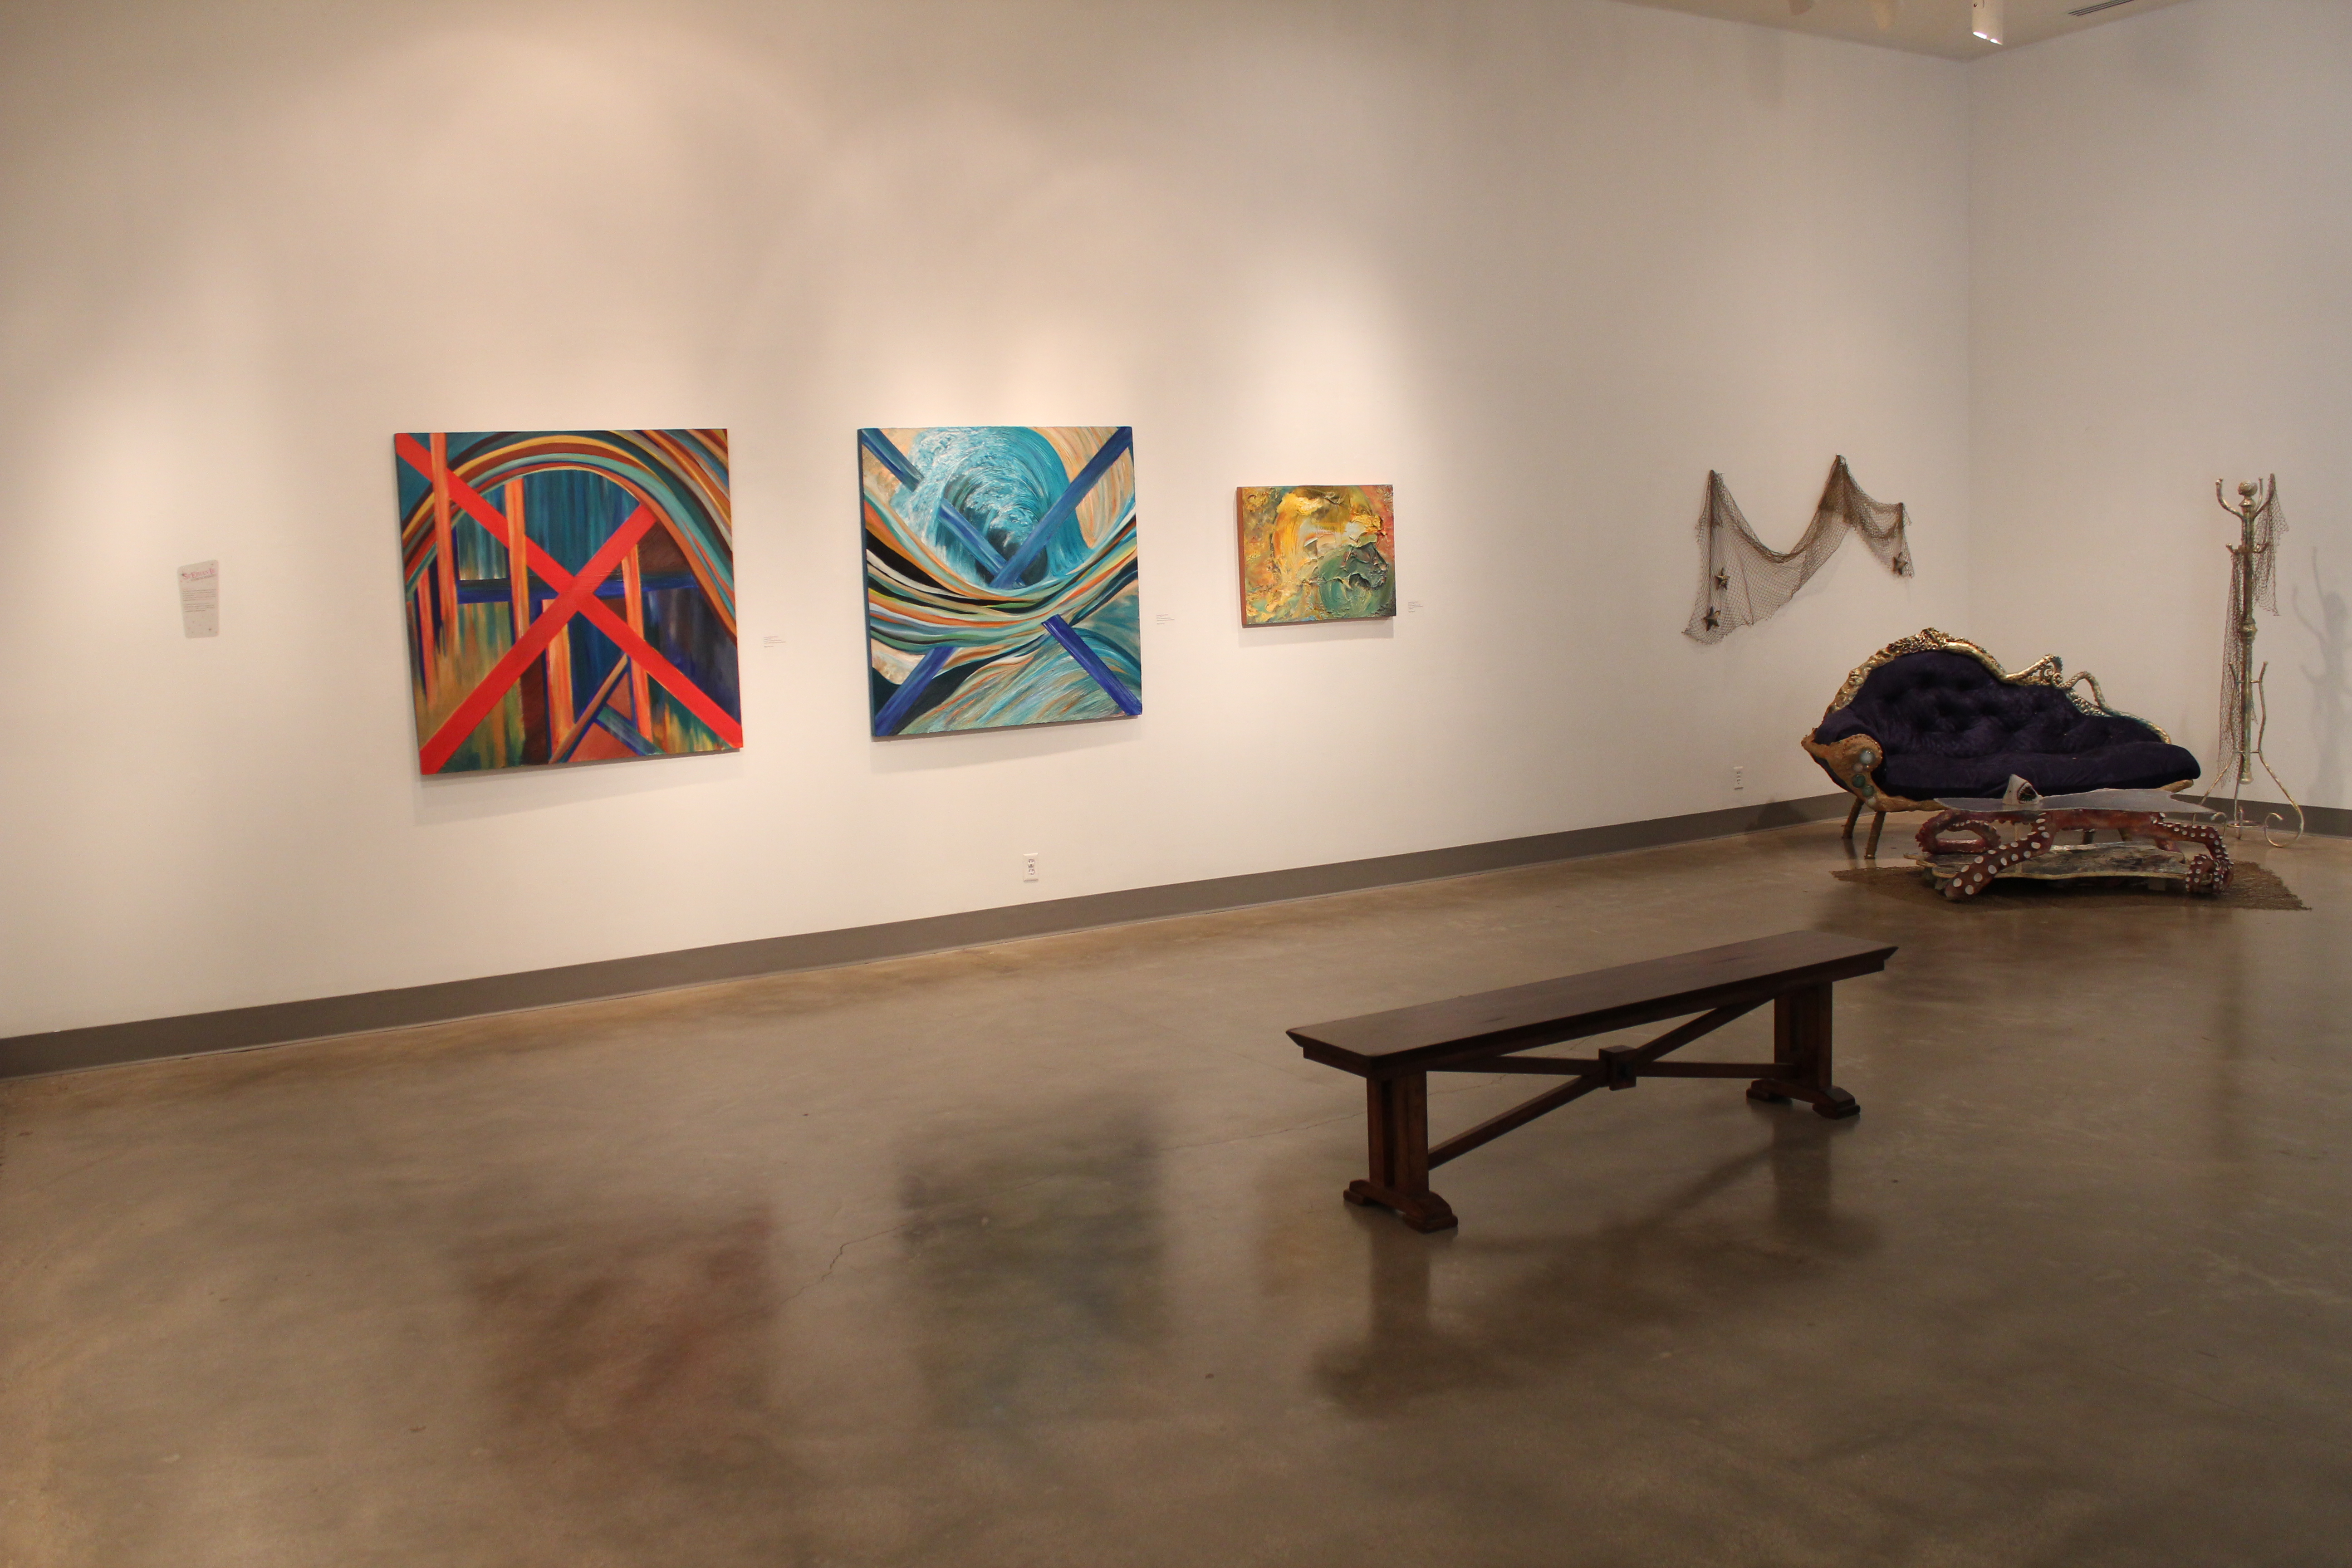 Installation View, Front West Gallery, Polykroma 2014 Exhibition, May. 19, 2014 to Jun. 15, 2014.